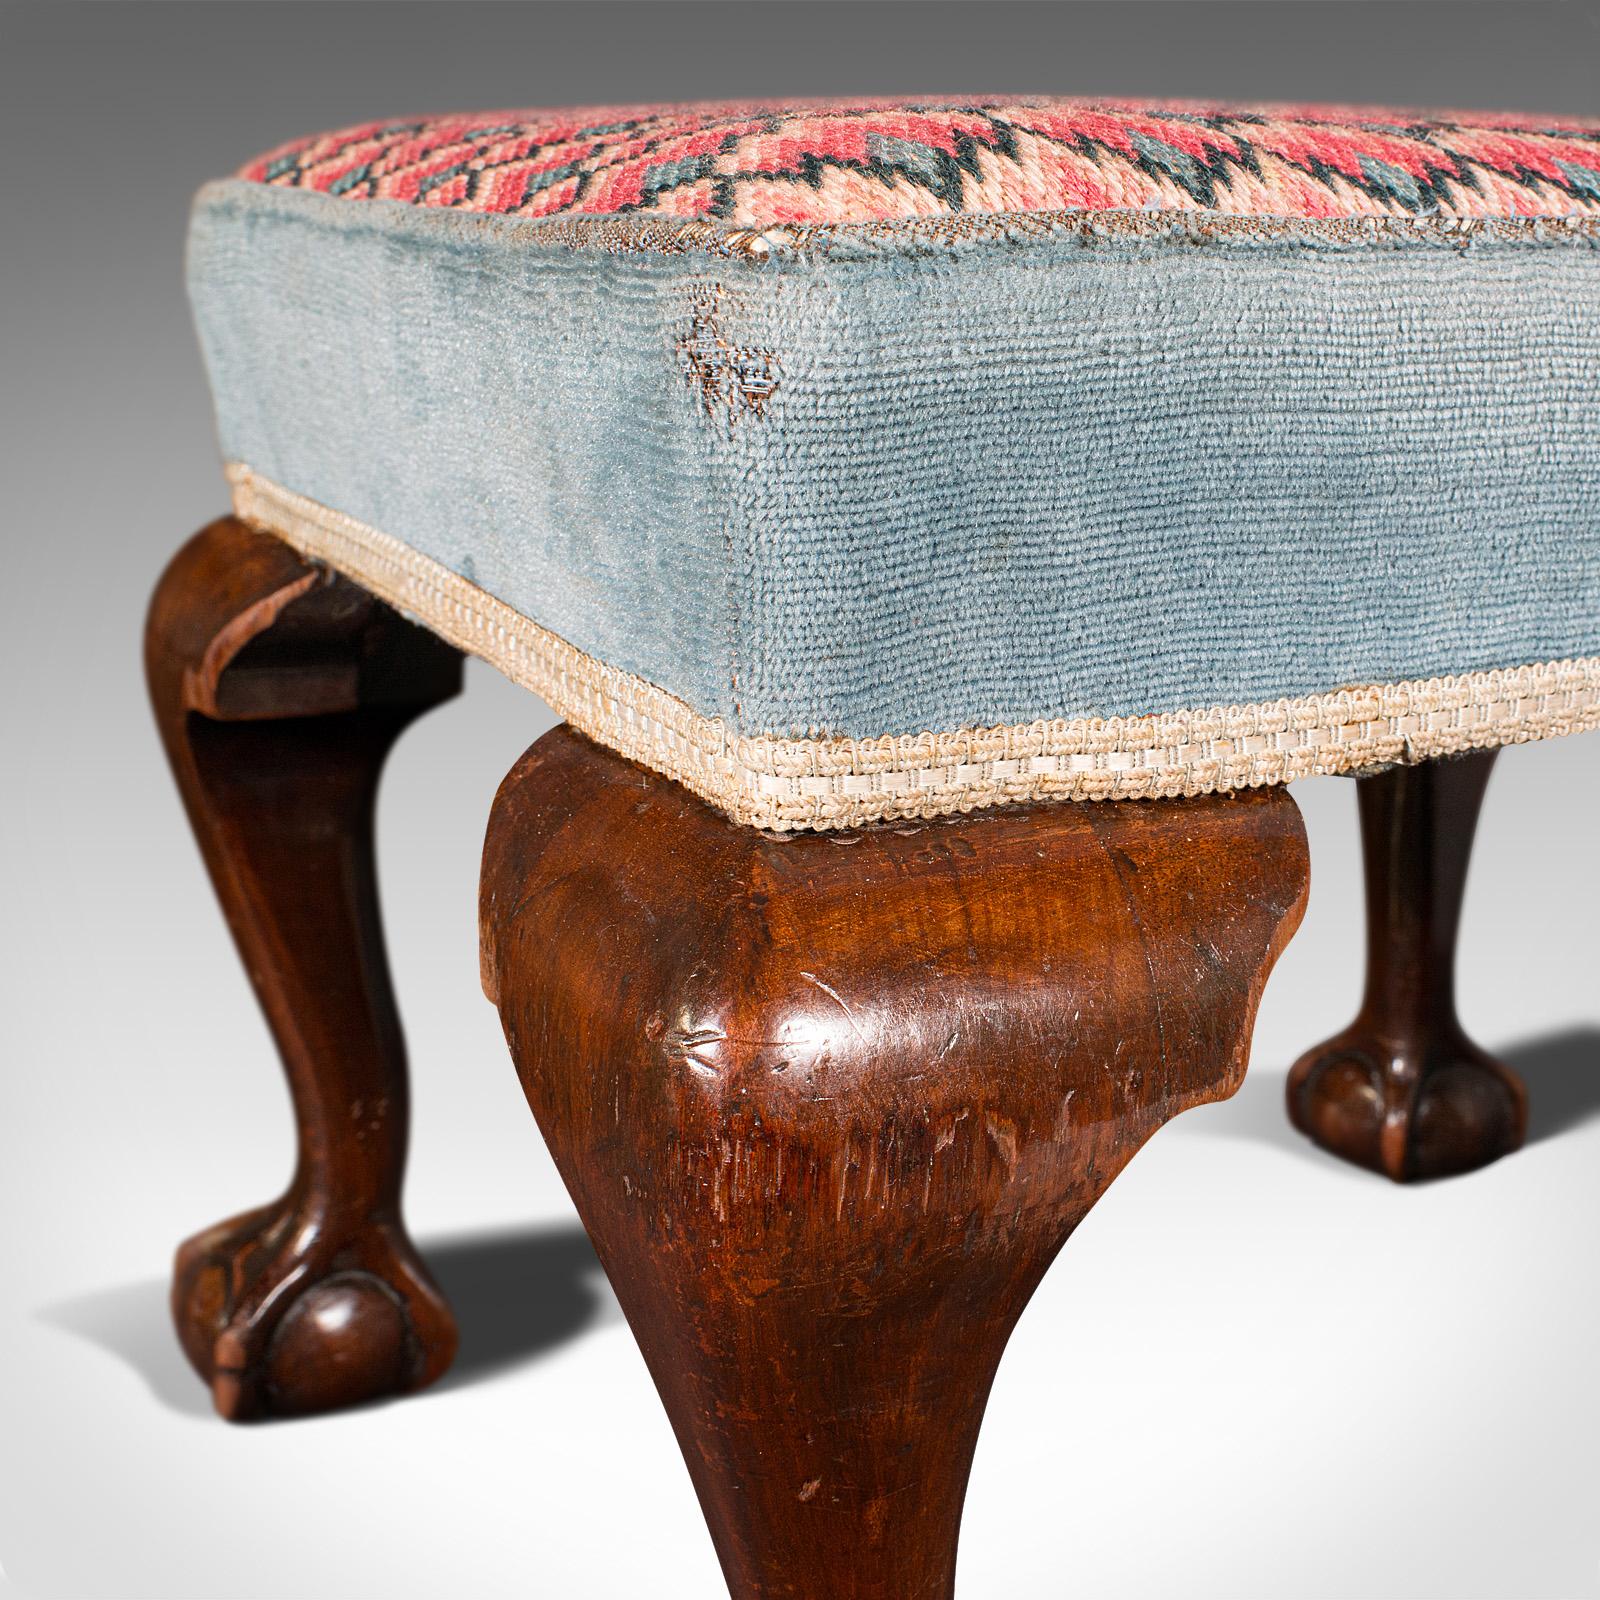 Antique Fireside Stool, English, Needlepoint, Footstool, Early Victorian, C.1850 For Sale 1